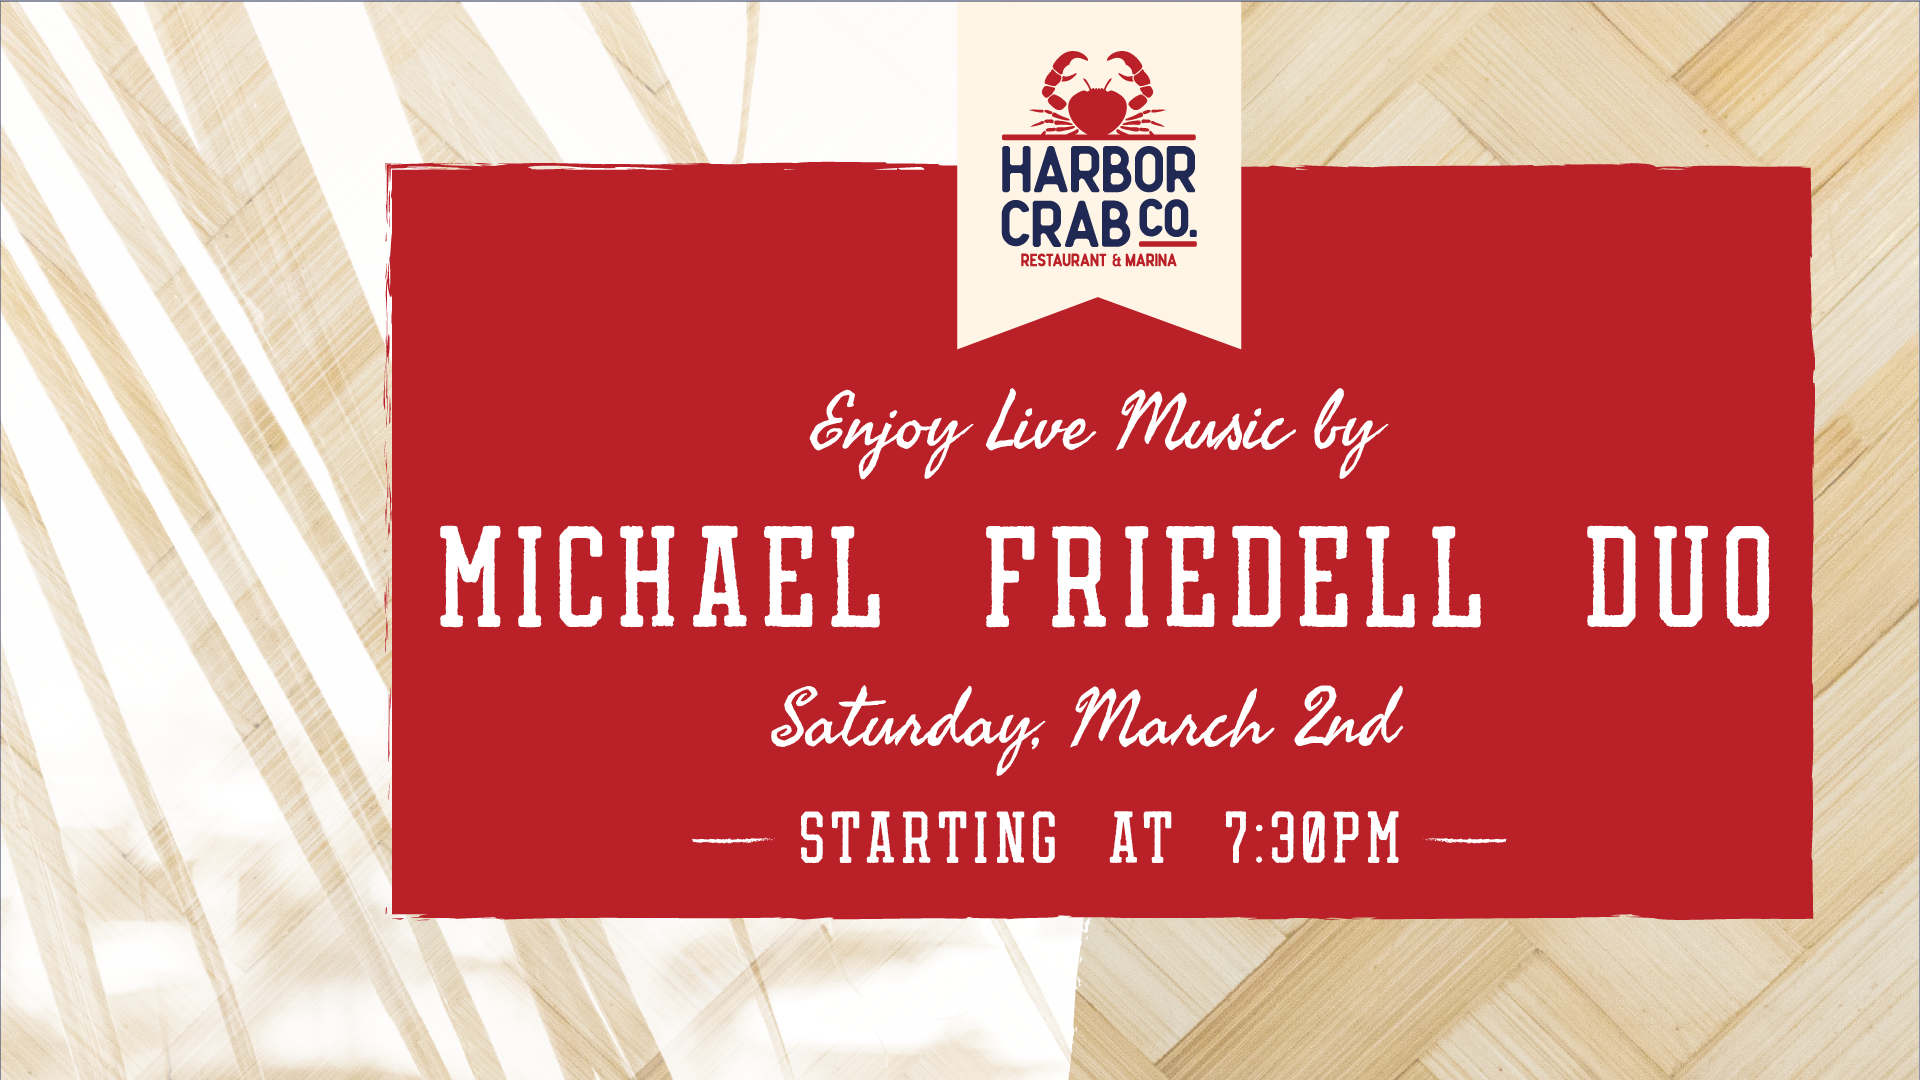 Harbor Crab Co. event flyer for live music featuring the Michael Friedell Duo on Saturday, March 2nd starting at 7:30 PM.